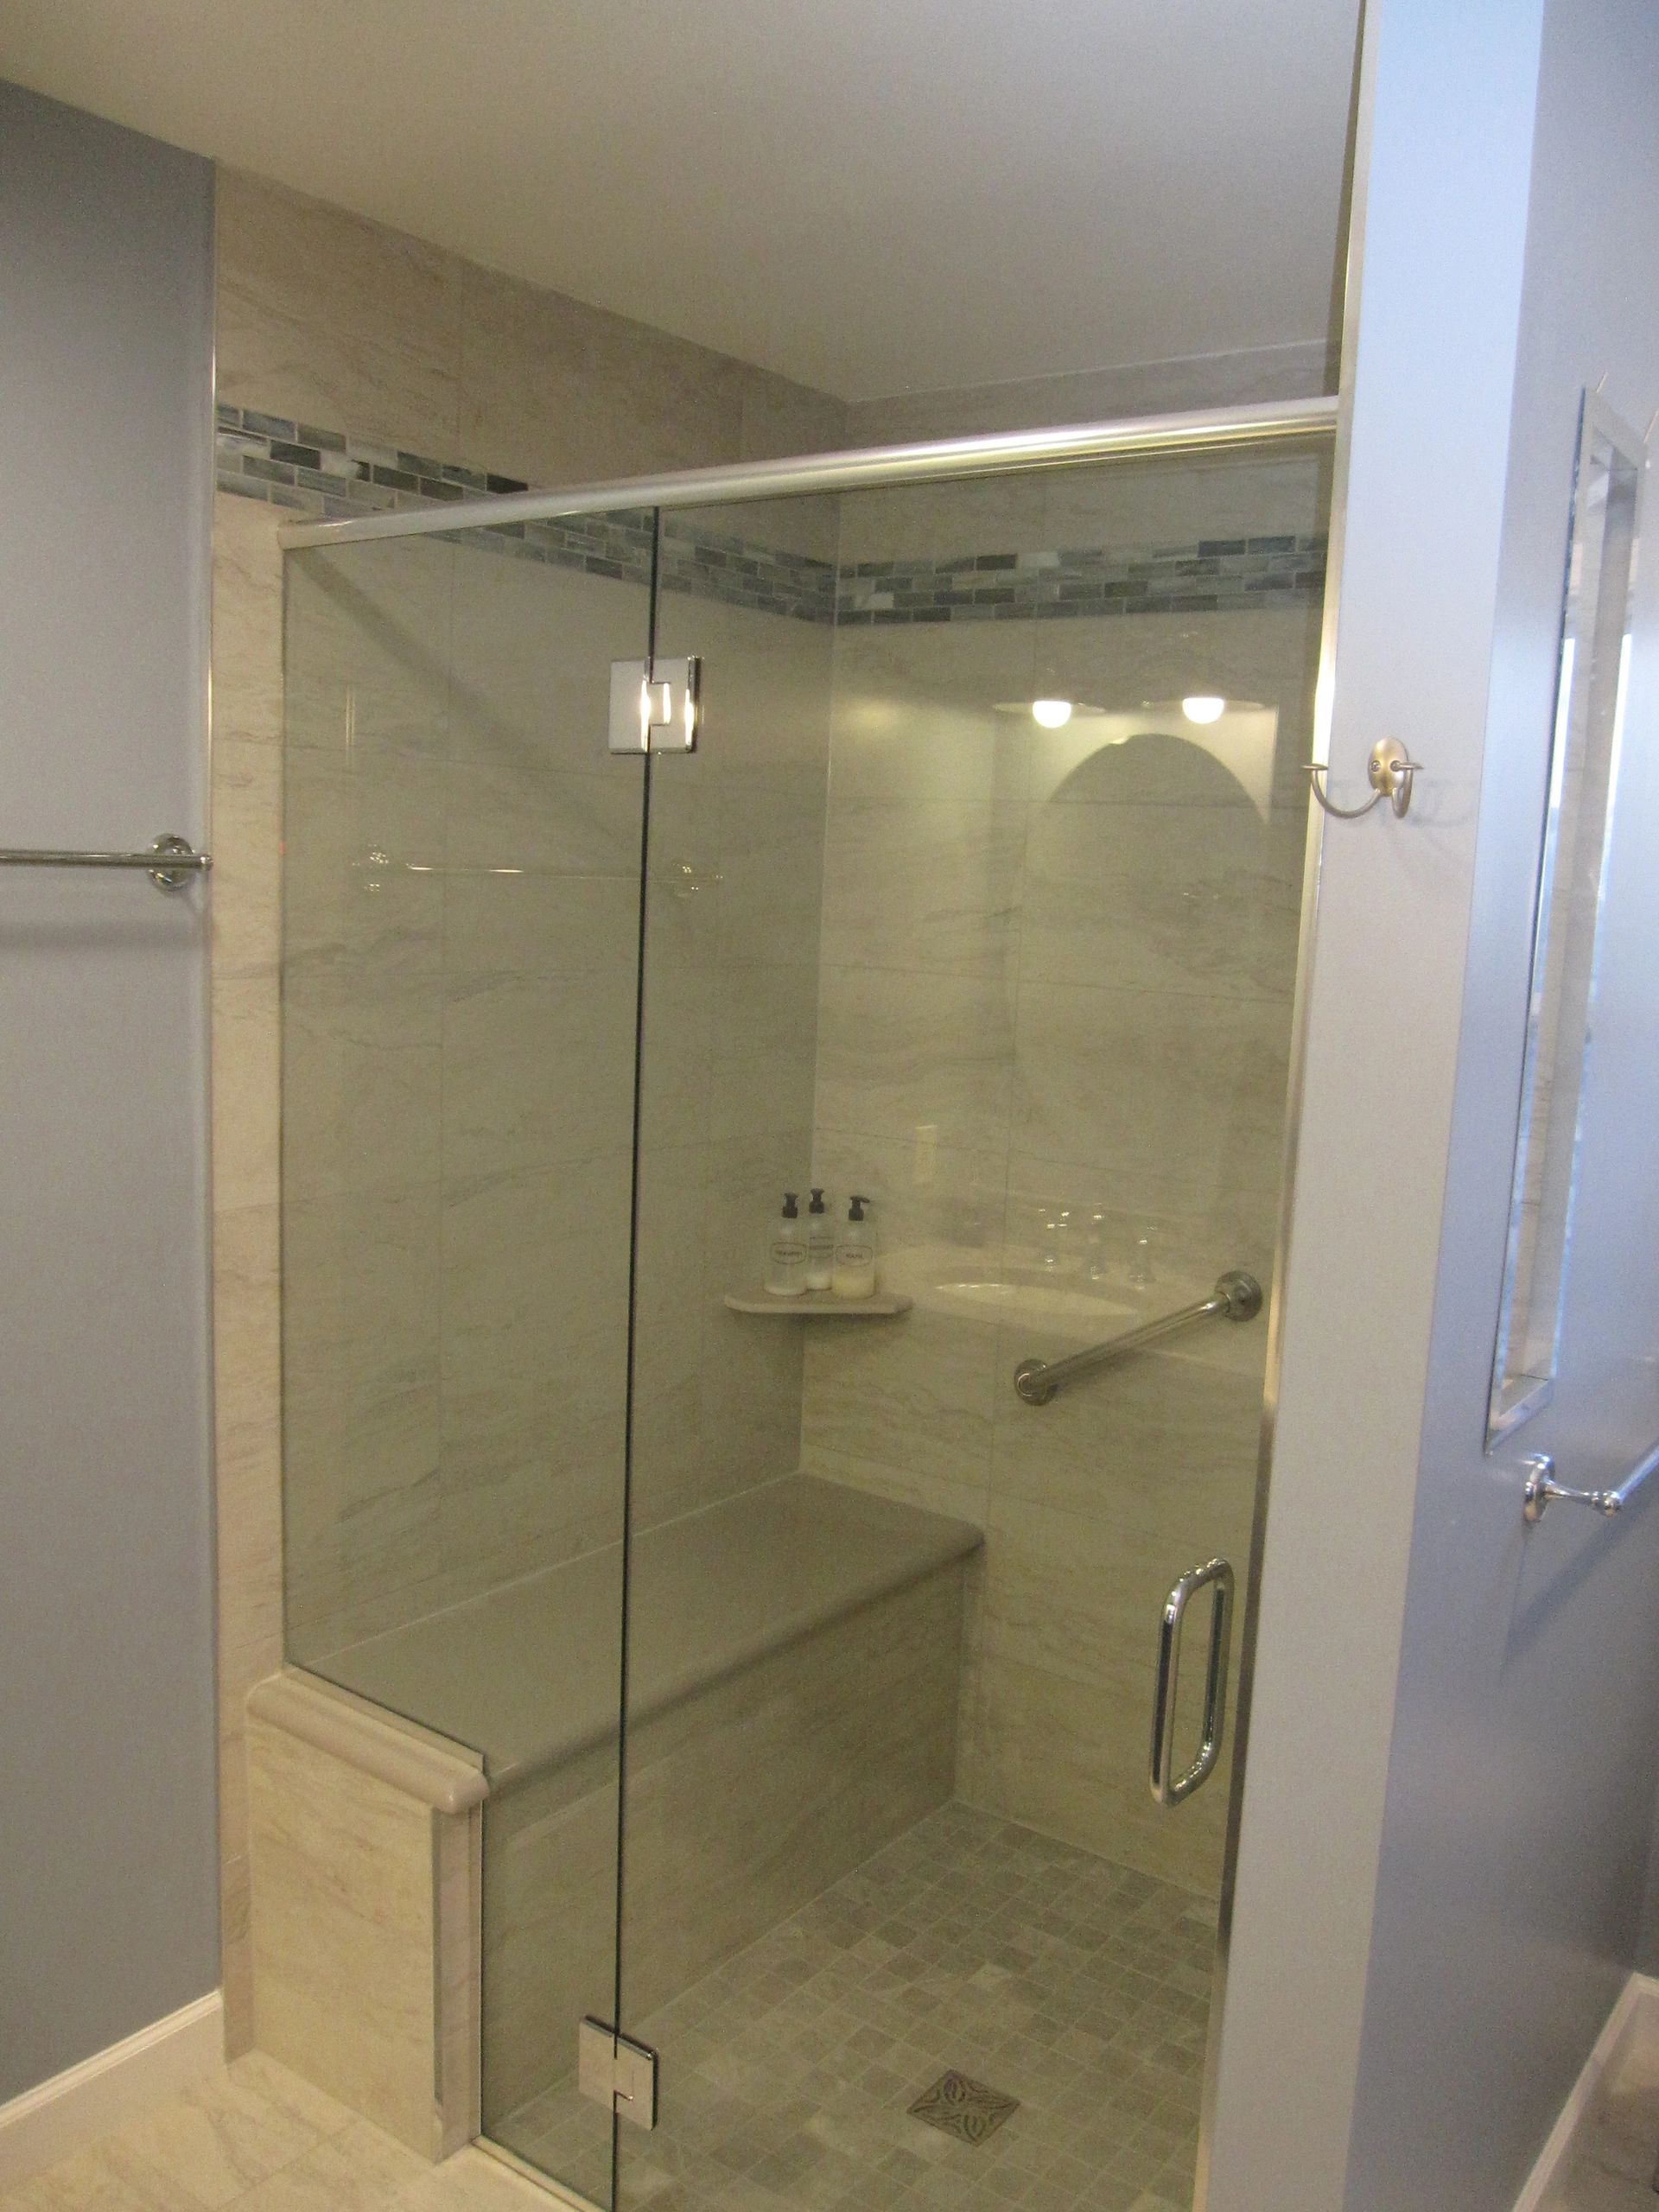 #curb less shower, #shower bench, #laticrete spectra lock grout, glass feature strip, #heated floor 